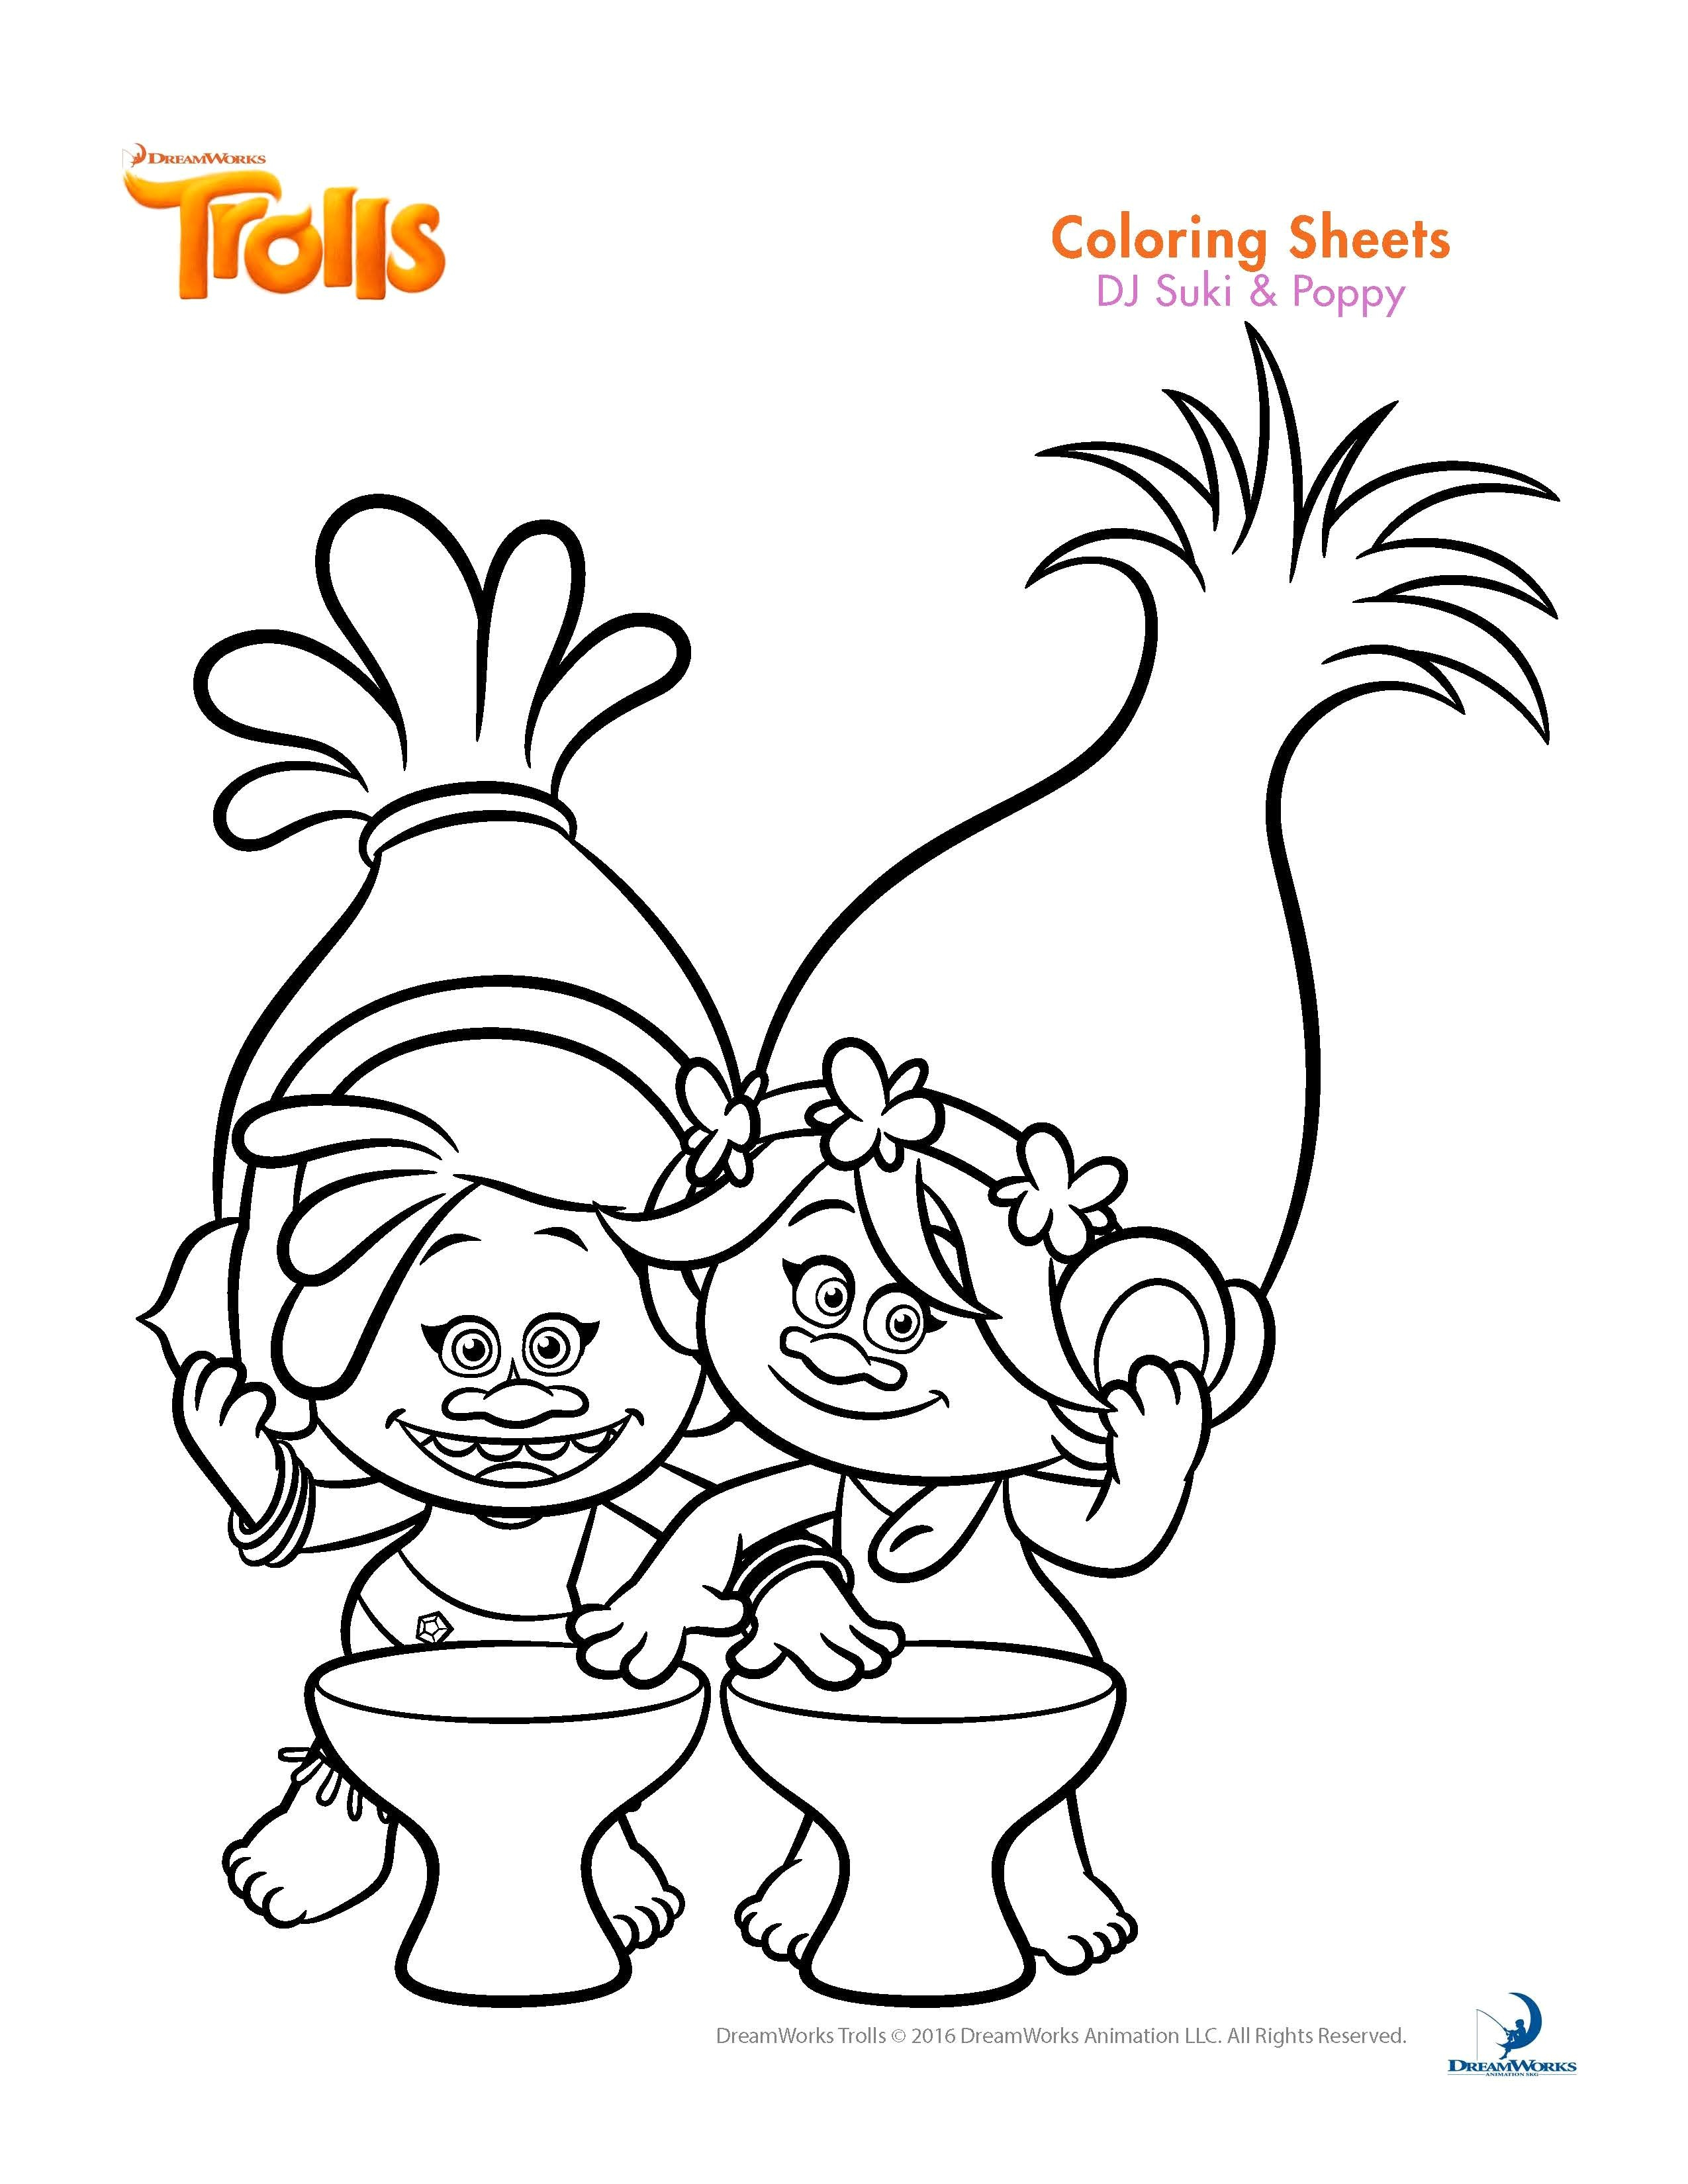 Trolls Movie Coloring Pages Trolls Movie Coloring Pages Best For Kids Stuning Dreamworks Home